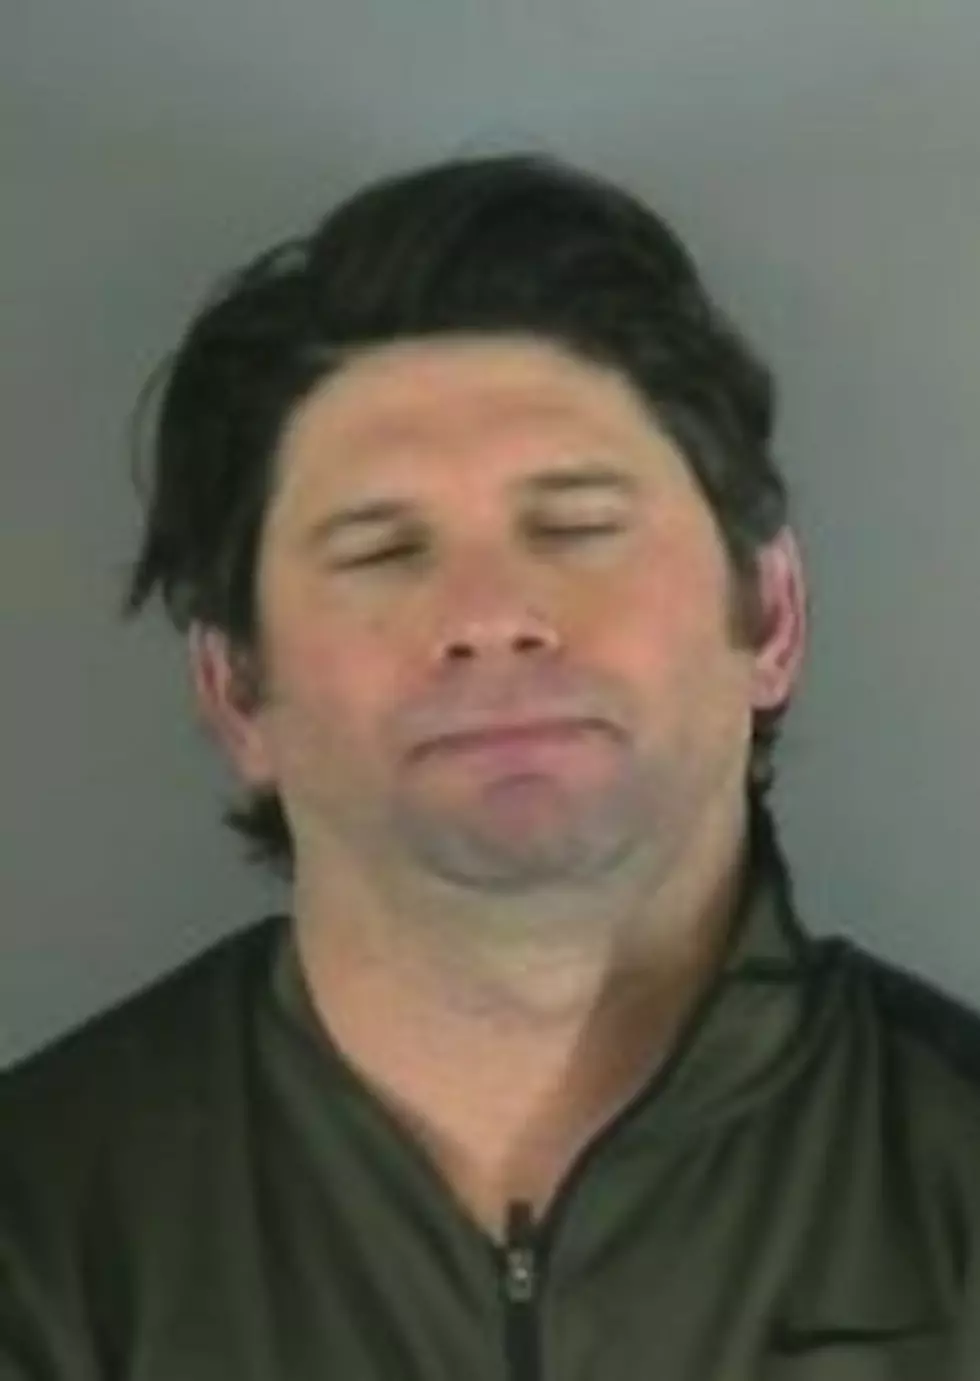 Todd Helton Gets a DUI, Drove Drunk to Get Lotto Tickets